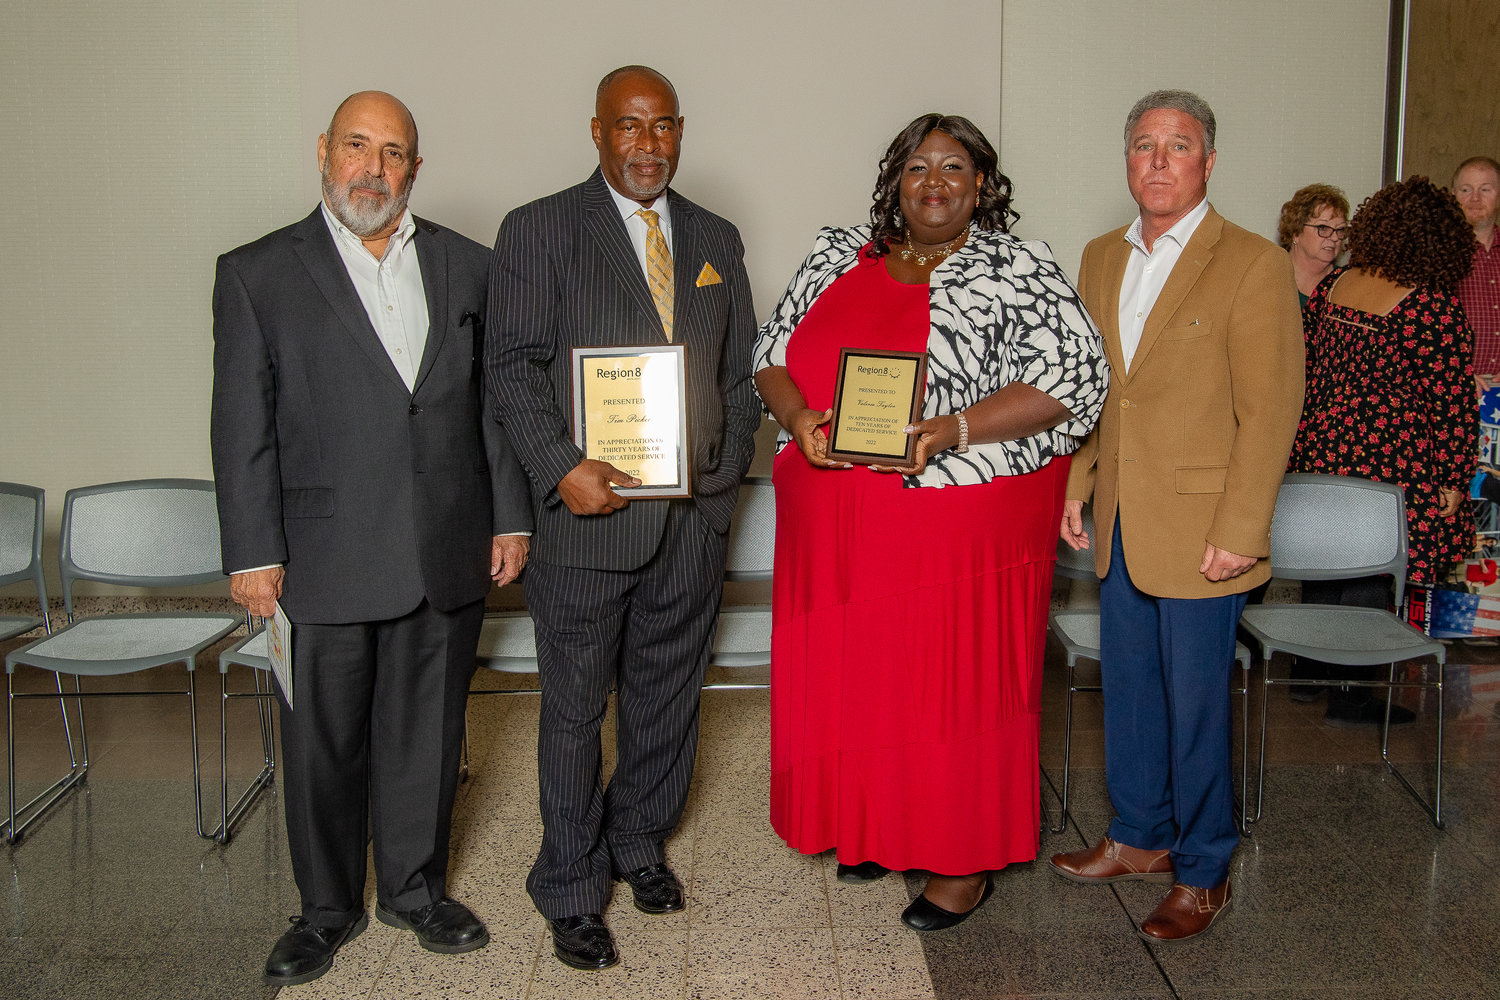 Dr. Nelson Cauthen, Madison County Region 8 Commissioner; Tim Pickett, 30 Year Tenure; Valerie Taylor, 10 Year Tenure, Dave Van, Region 8 Executive Director Not Pictured:  Michael O’Reilly, Madison County Employee of the Year; Debra Manor, 10 Year Tenure